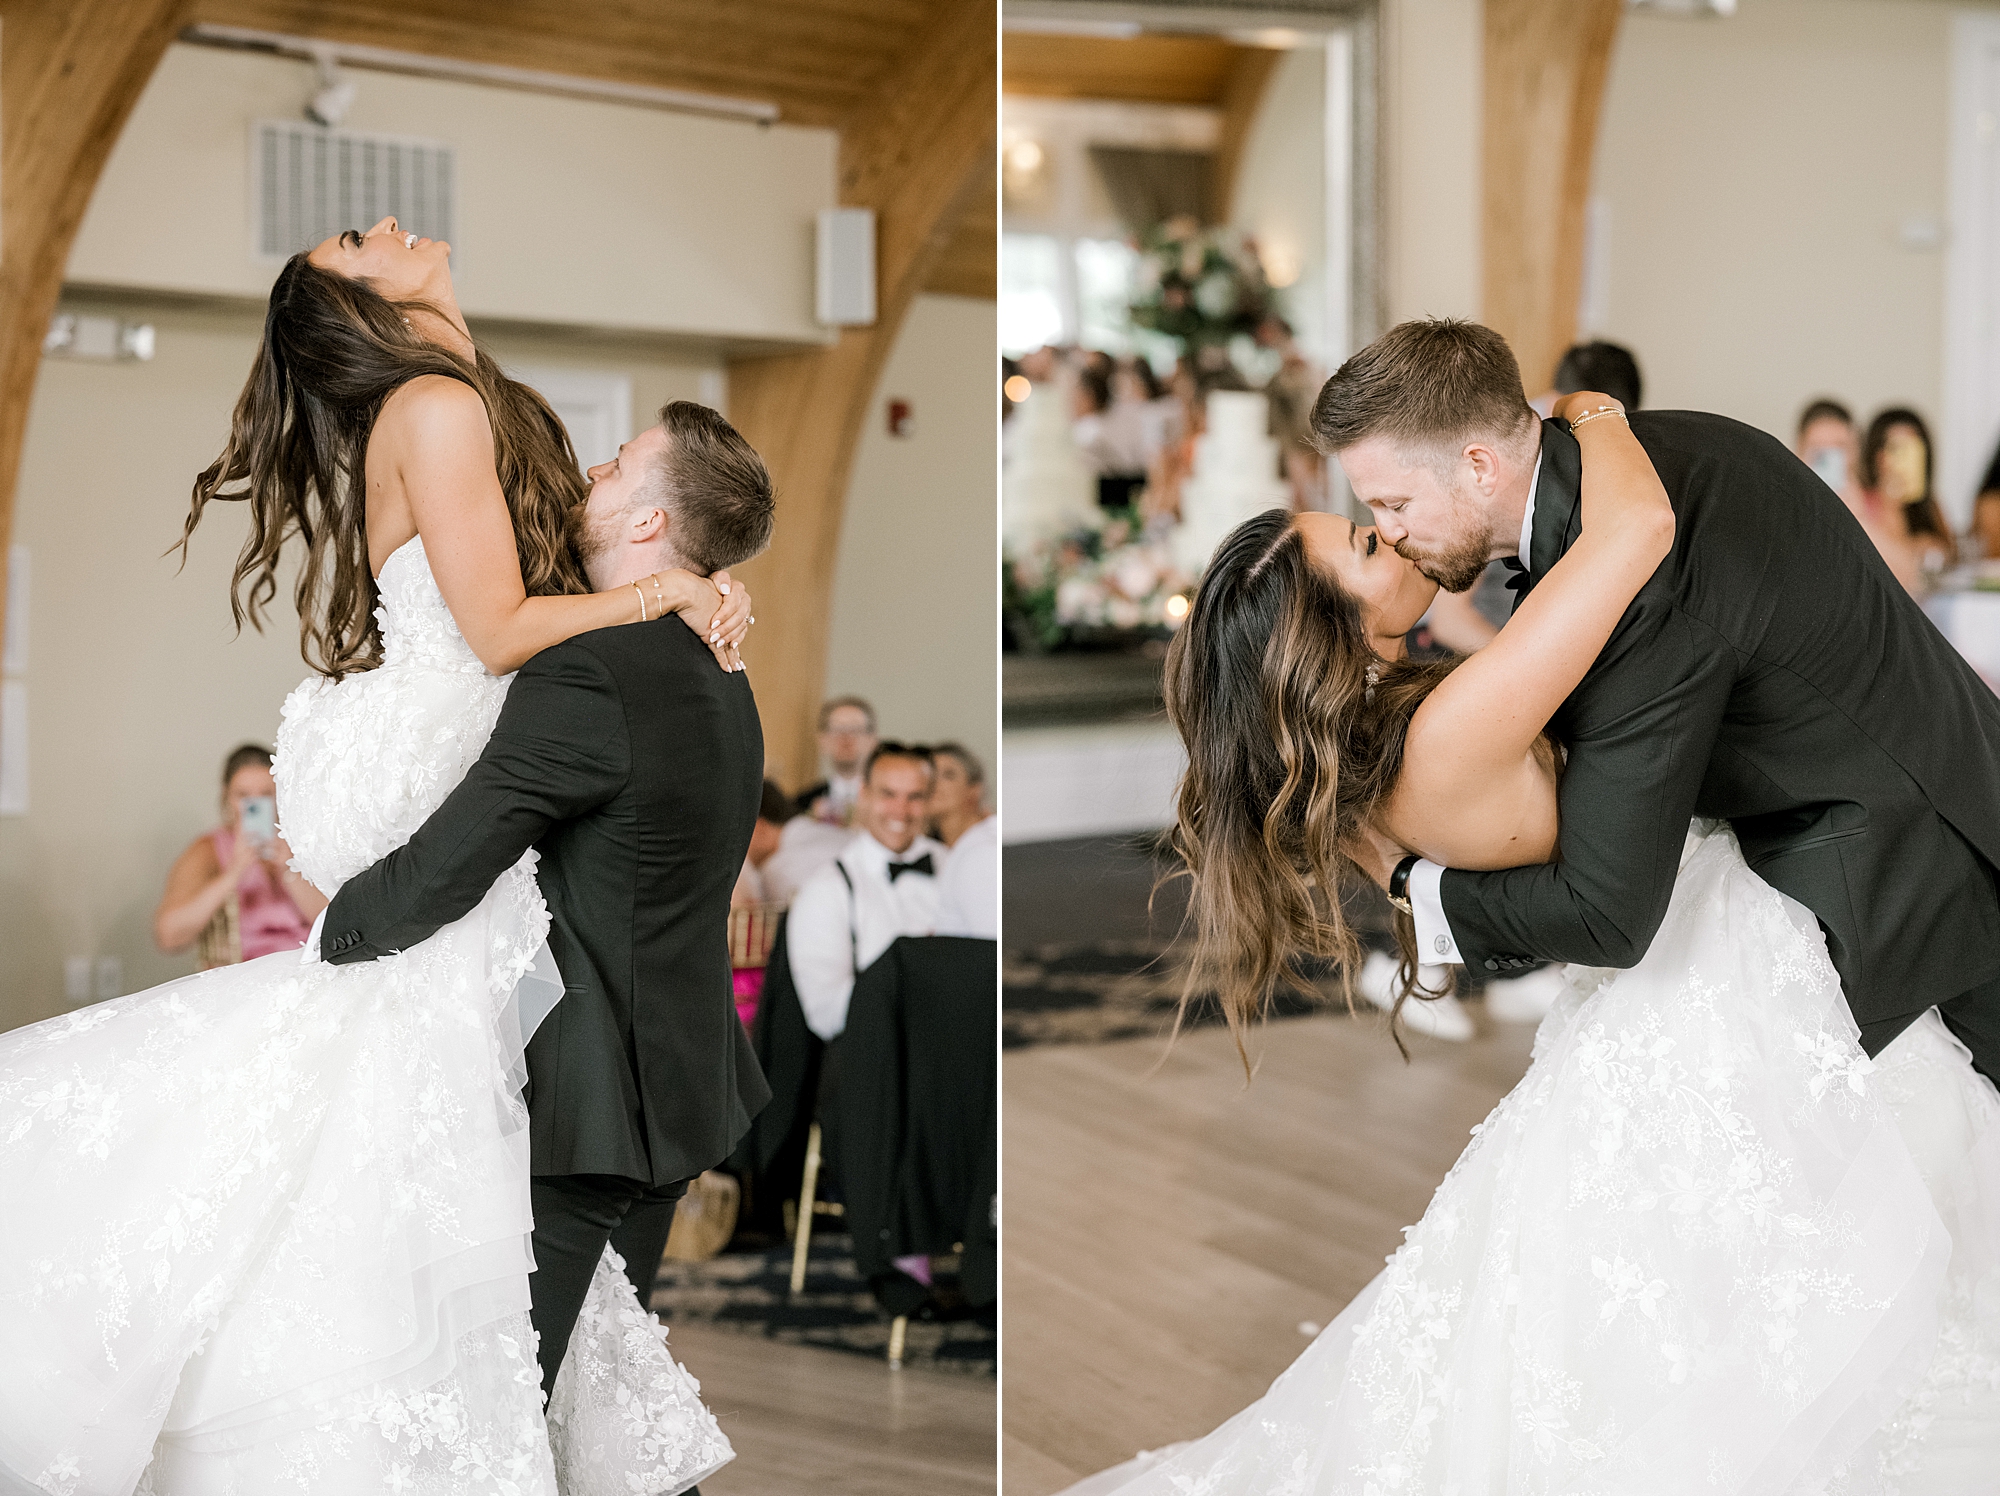 bride and groom laugh and kiss on dance floor at LBI wedding reception